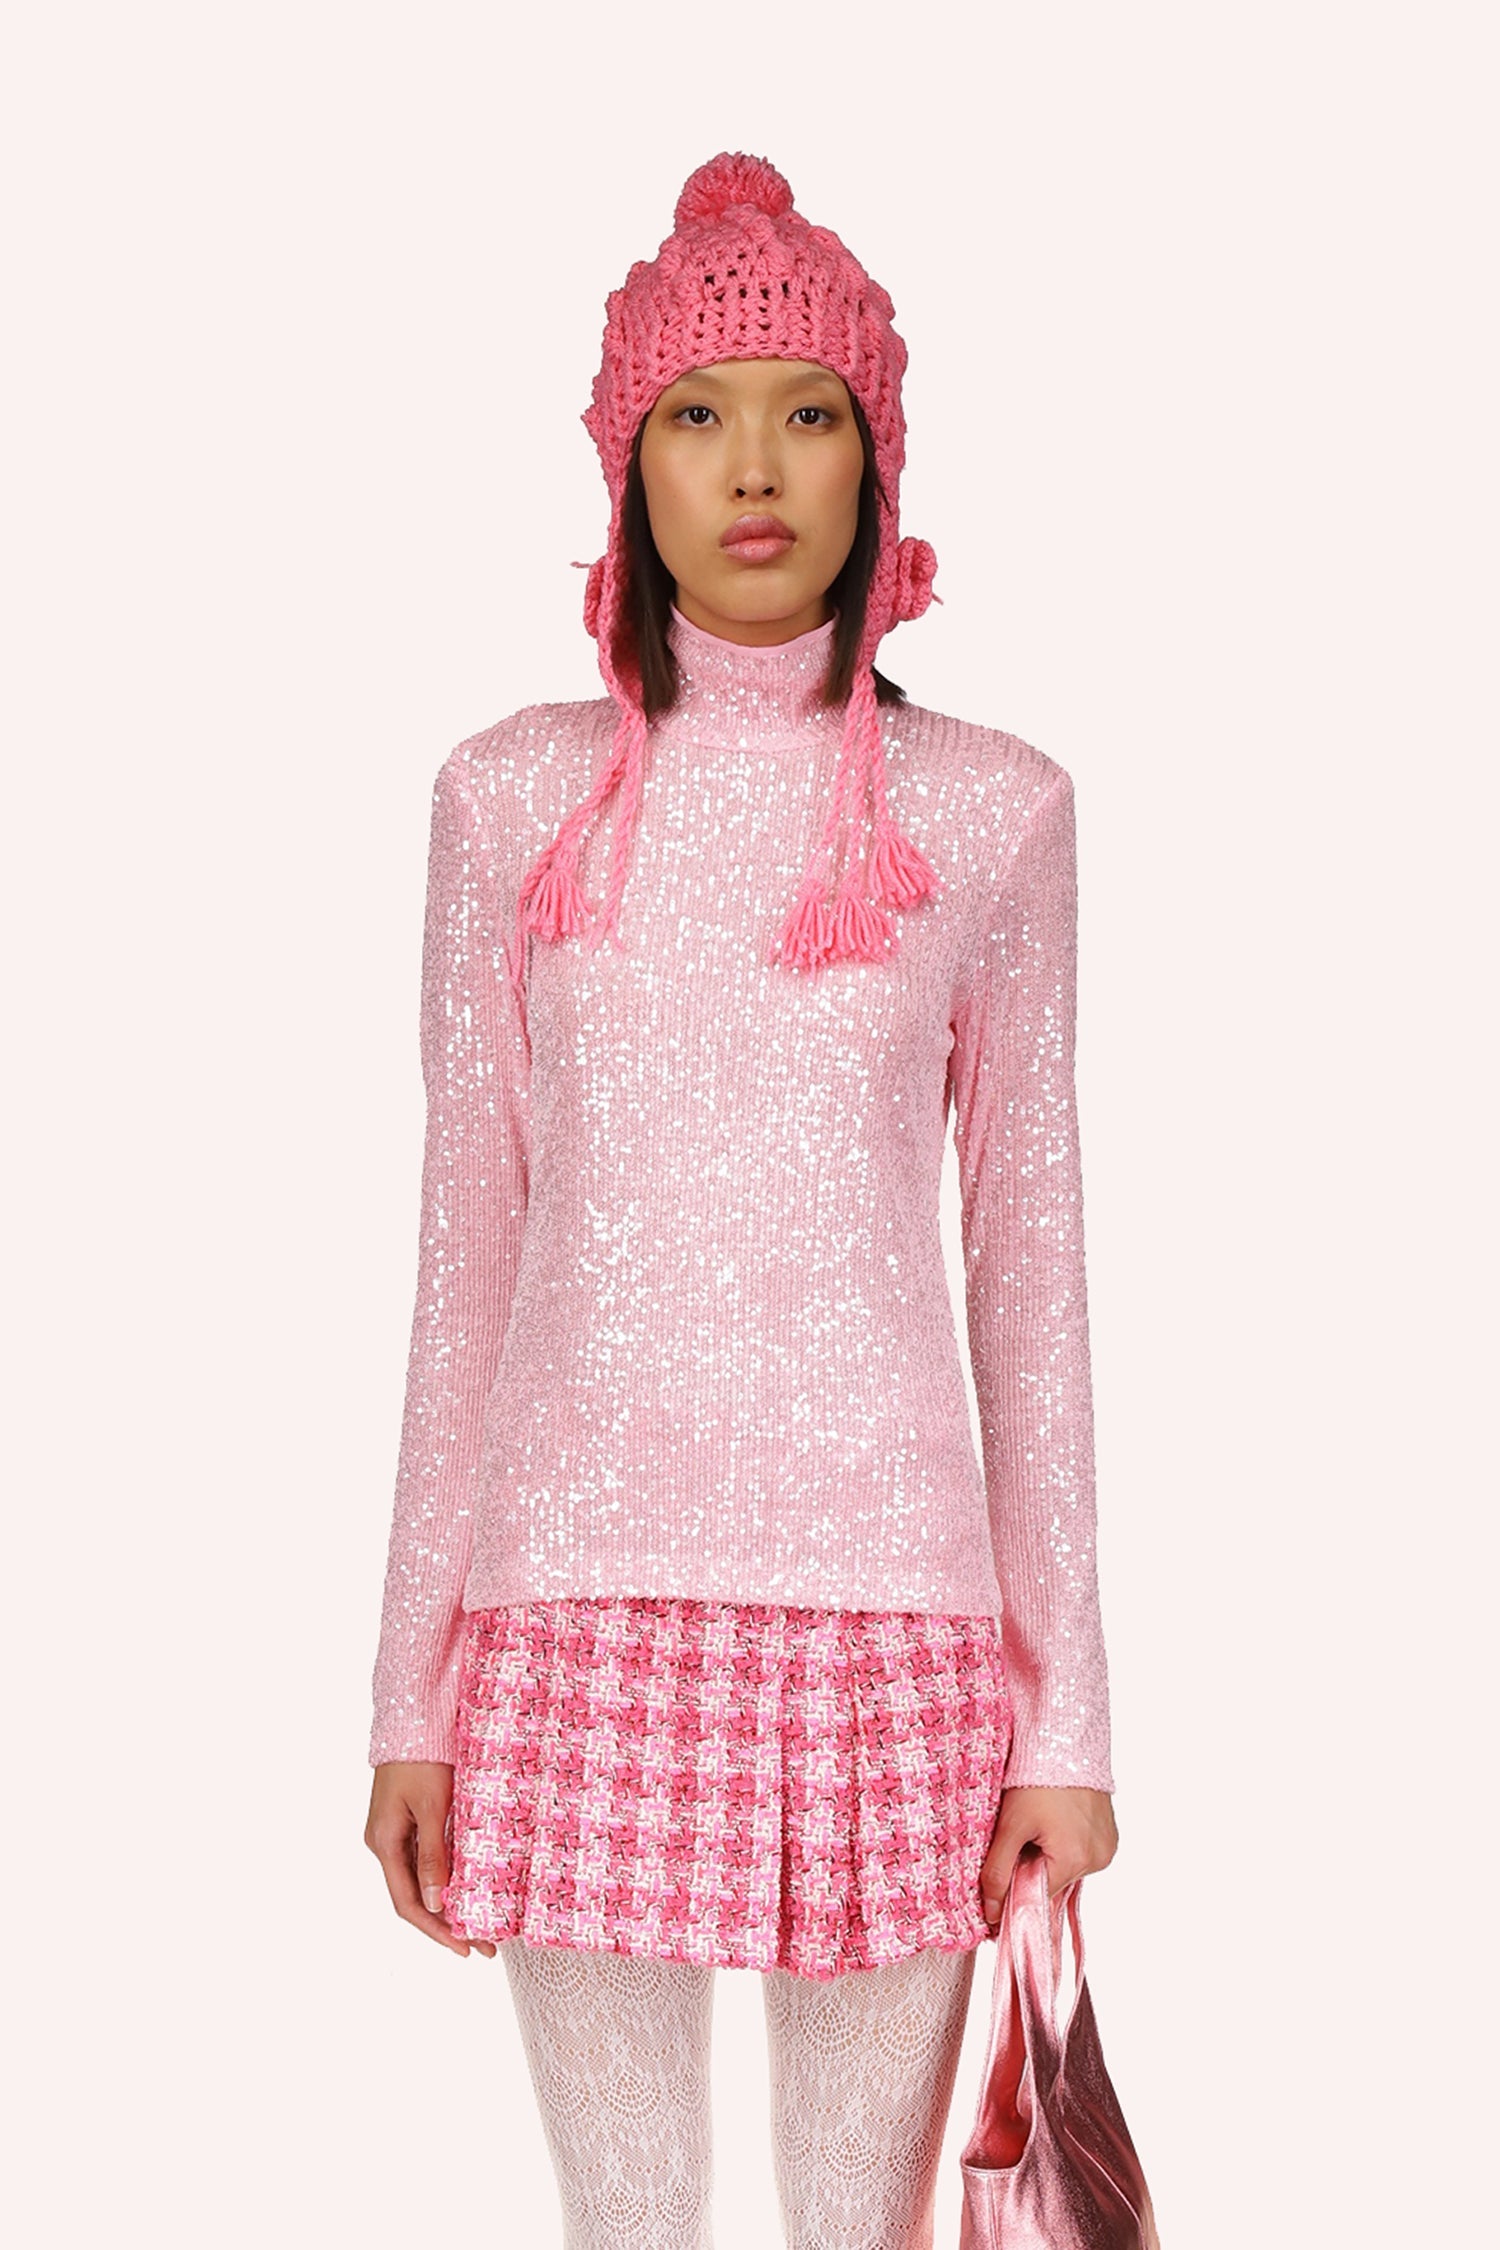 Anna Sui Sequin Mesh Turtleneck Baby Pink, long sleeves, and turtleneck collar accentuates the neckline, hips long